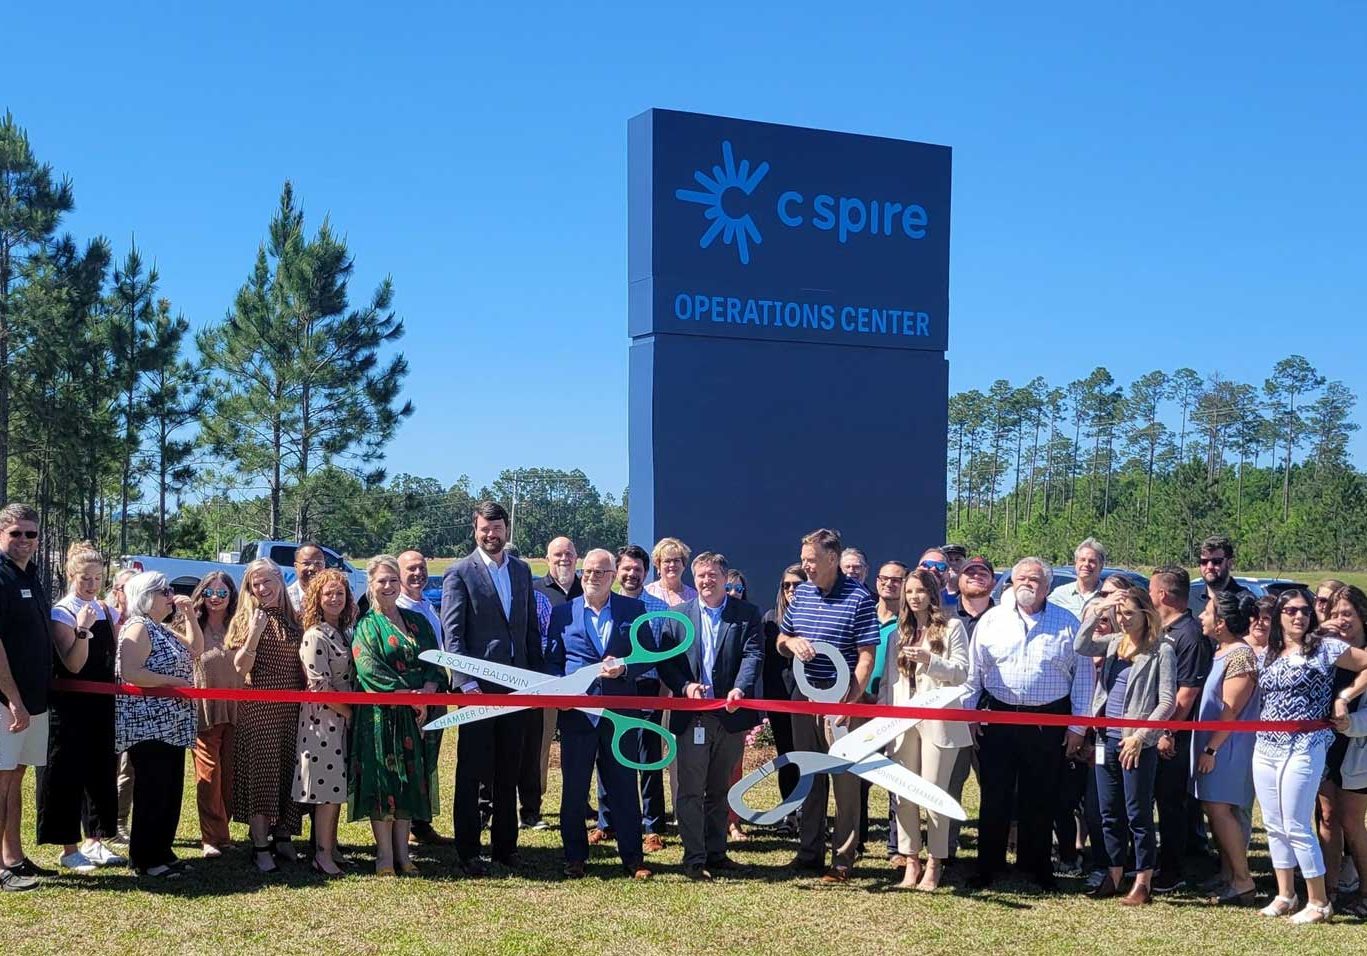 C Spire Opens Foley Office, Warehouse